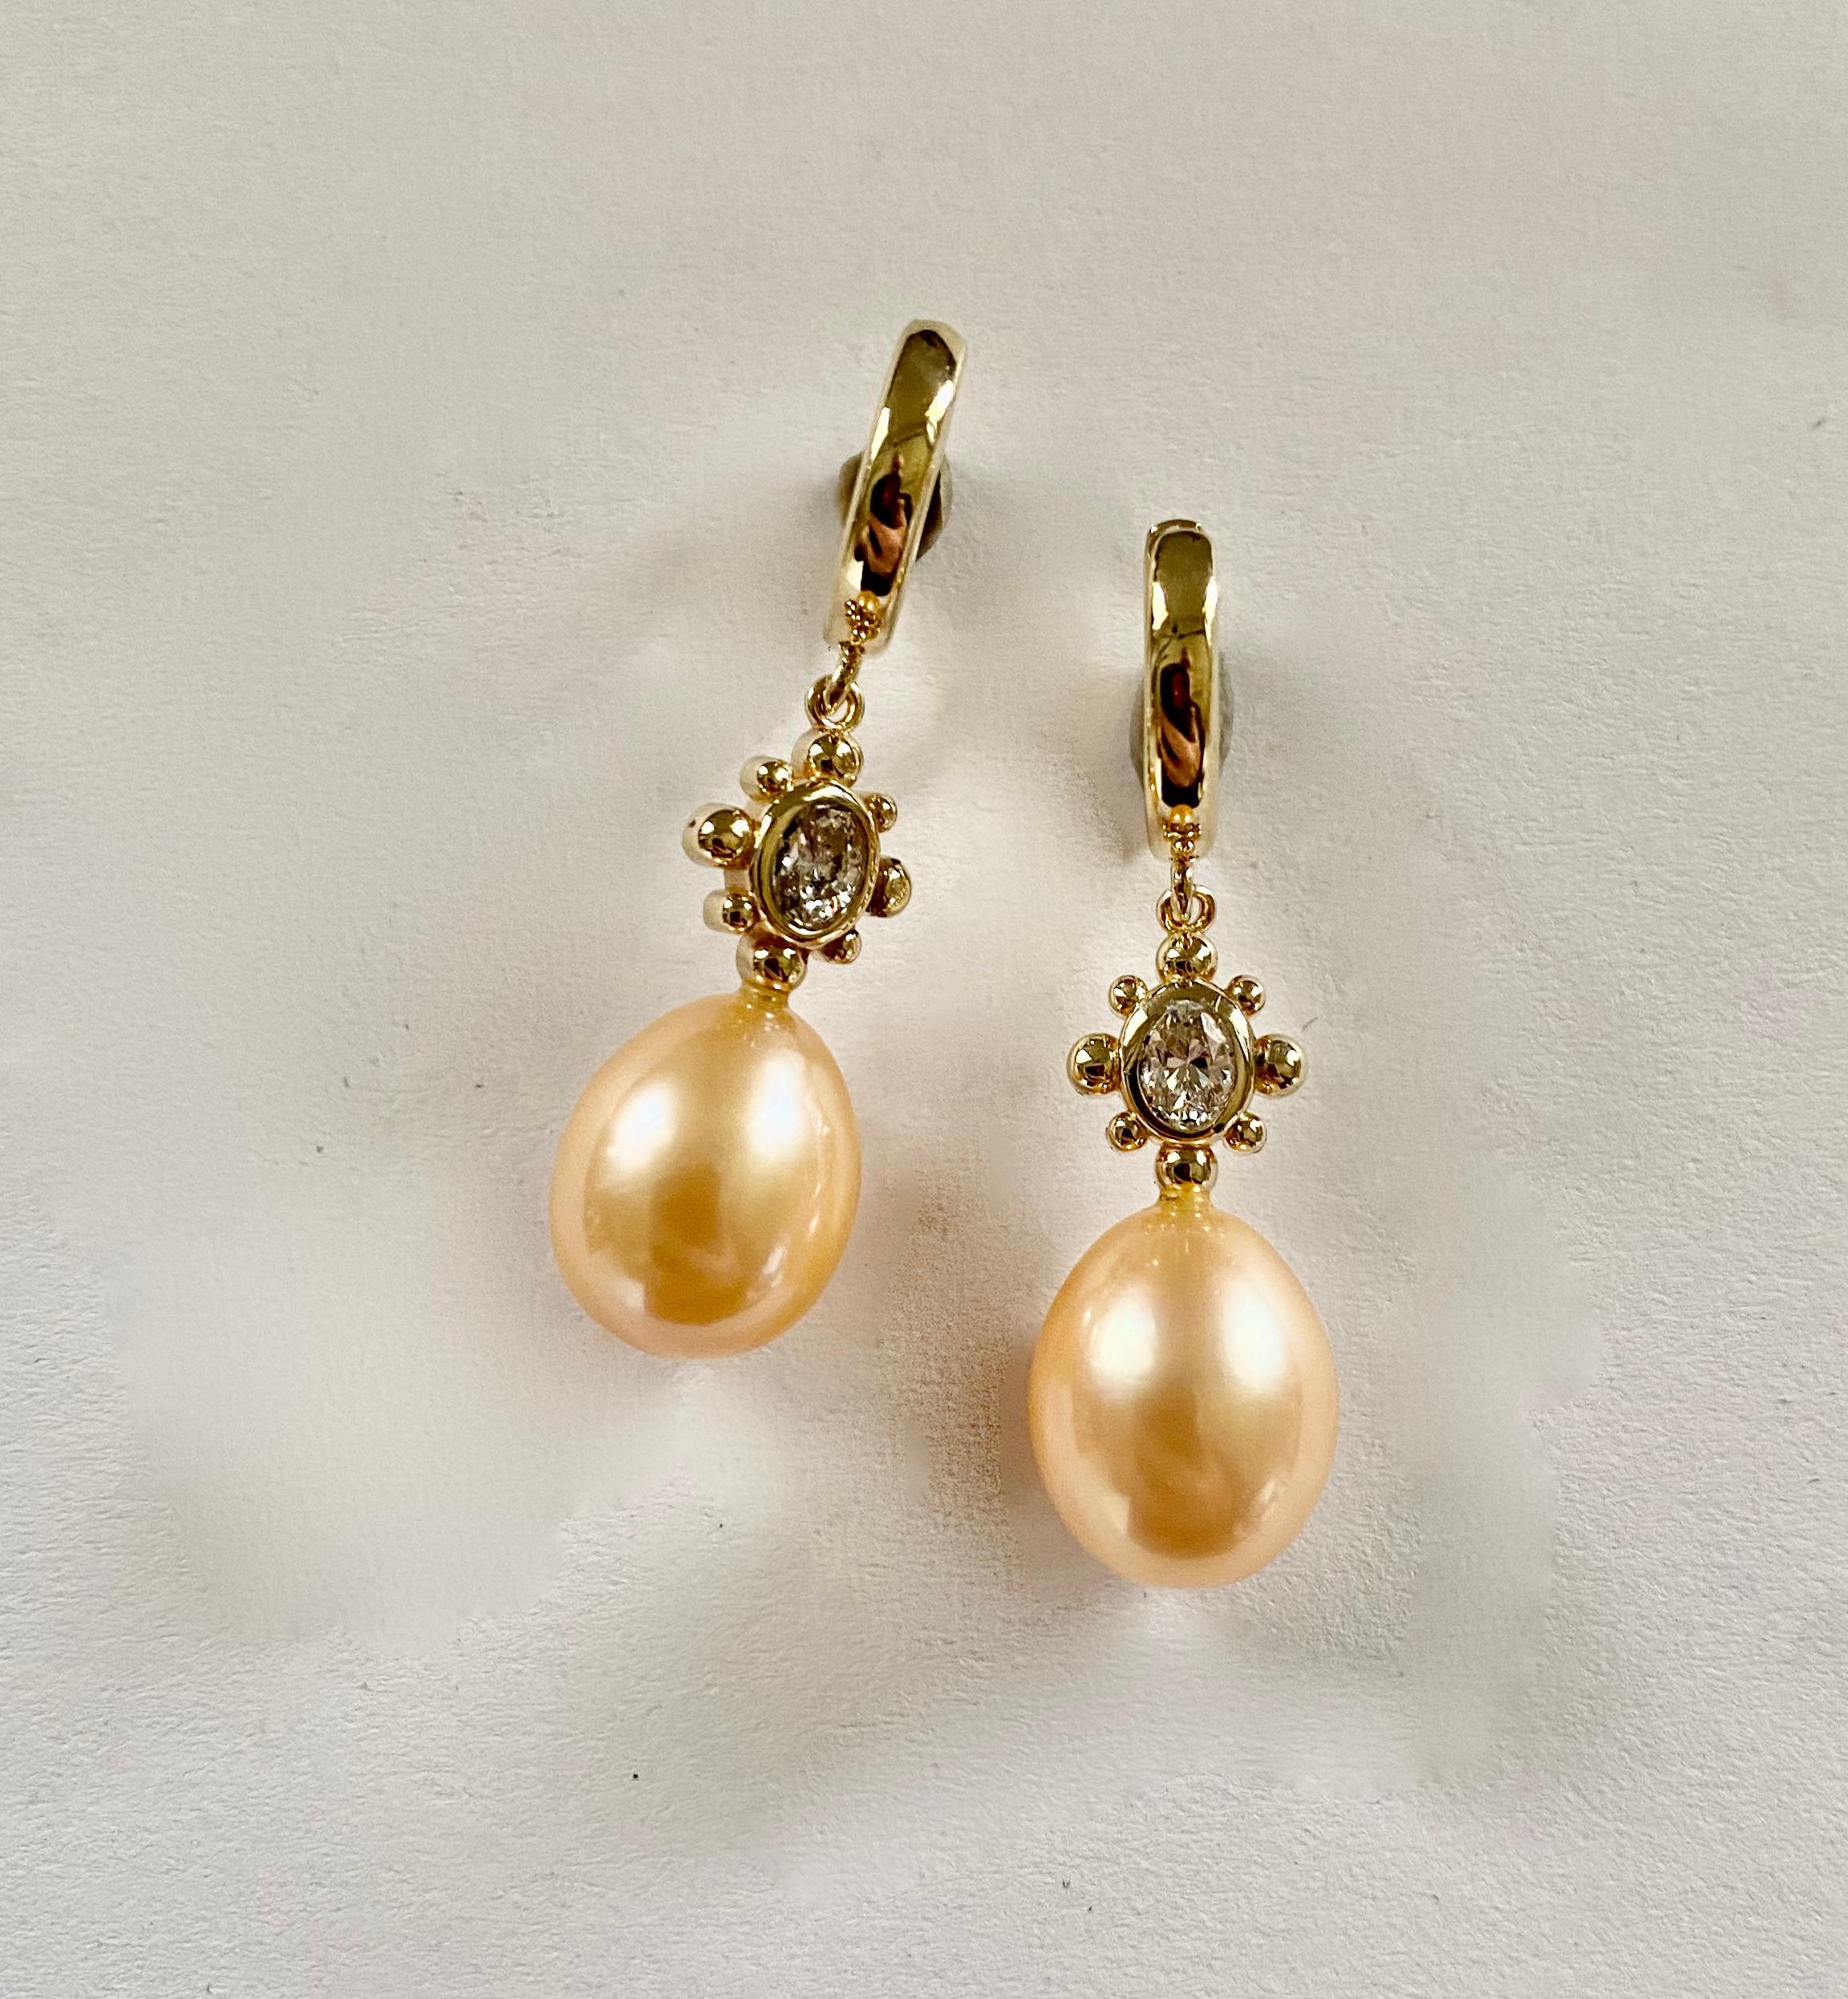 Pink pearls are paired with oval diamonds in these dainty dangle earrings.  The pearls are pear shaped and are a delicate shell pink. They are blemish free and possess beautiful luster.  The design for these earrings was inspired by Vermeer's 